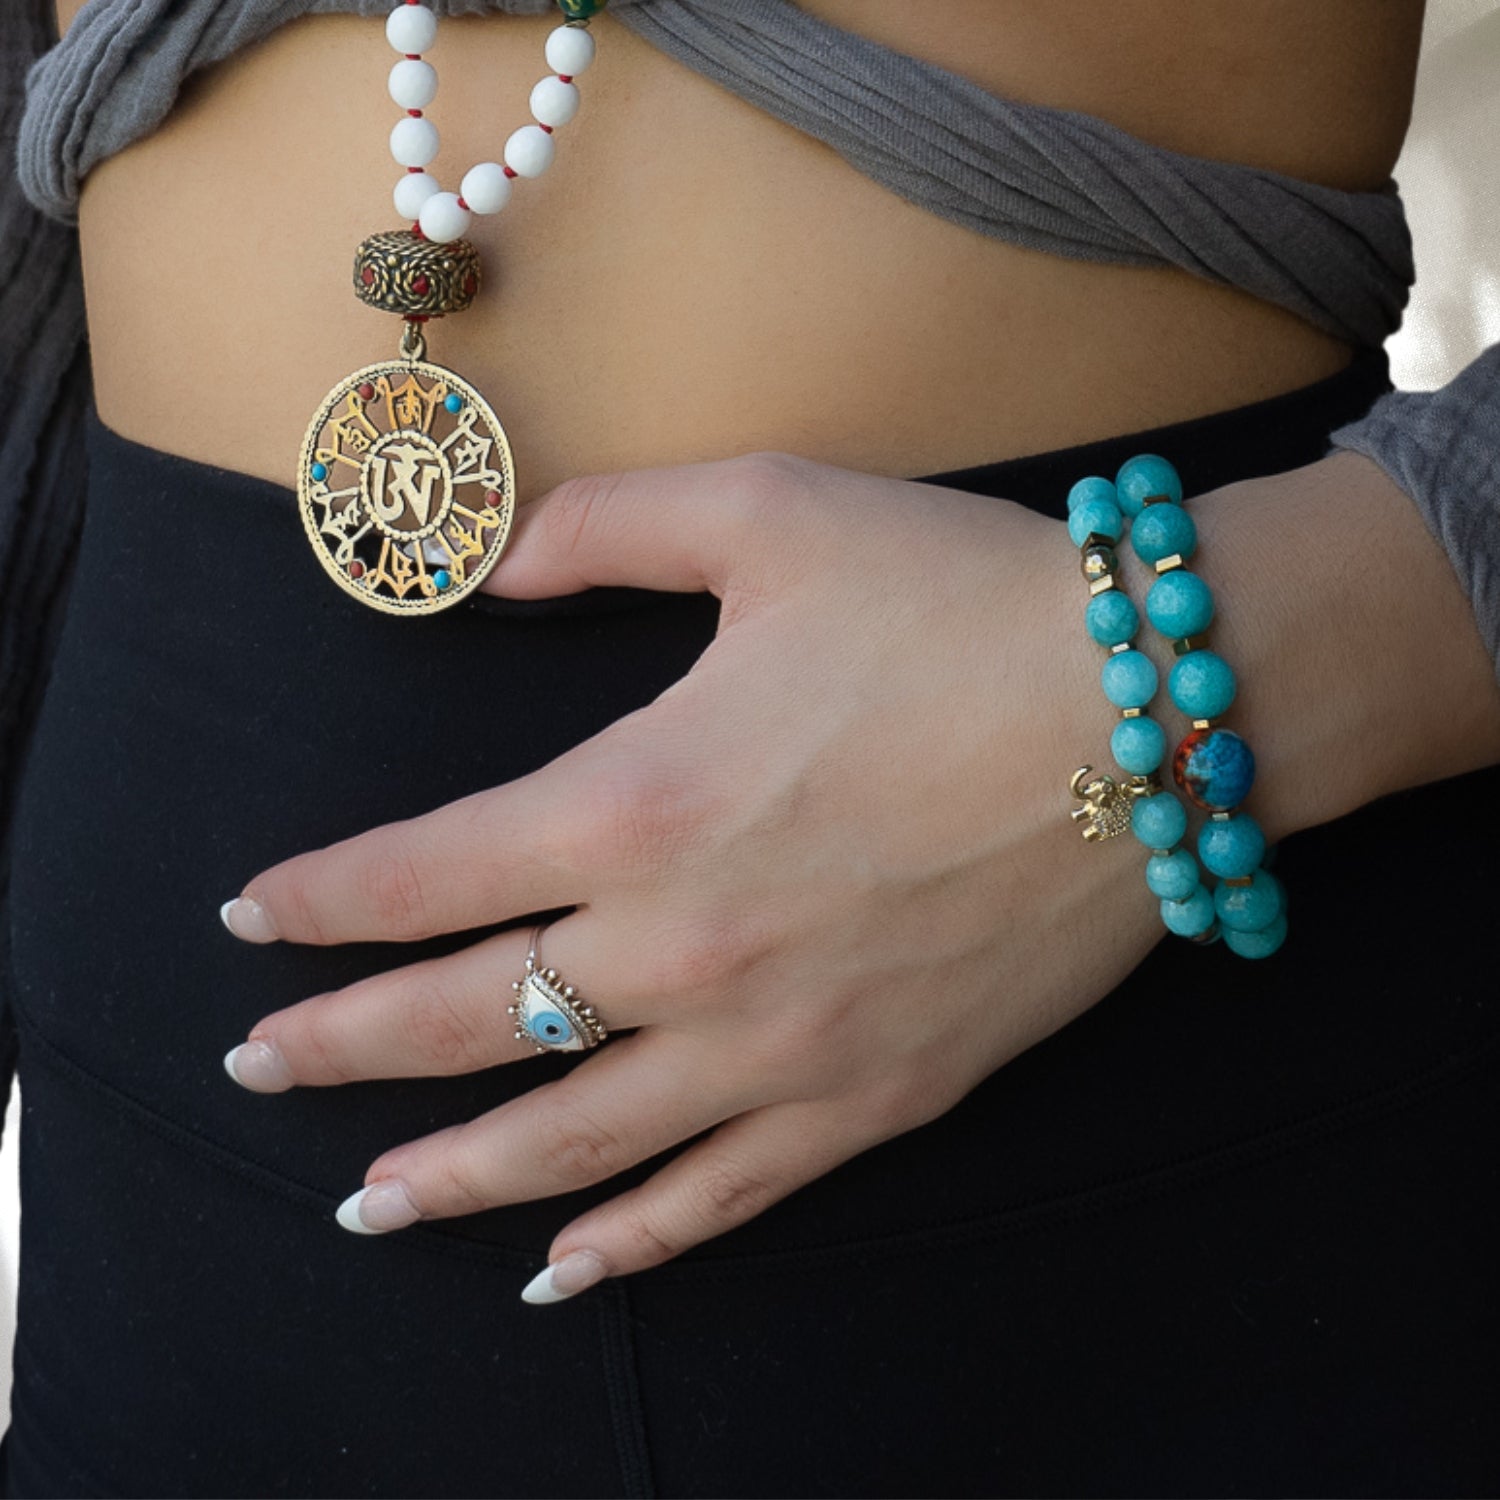 A model wearing the Amazonite Hope Bracelet, featuring a combination of calming pale blue-green amazonite stone beads, gold color hematite stone spacers, African beads and gold hematite stone beads. This unique and one-of-a-kind bracelet is perfect for those looking for a little extra positive energy and hope in their life.